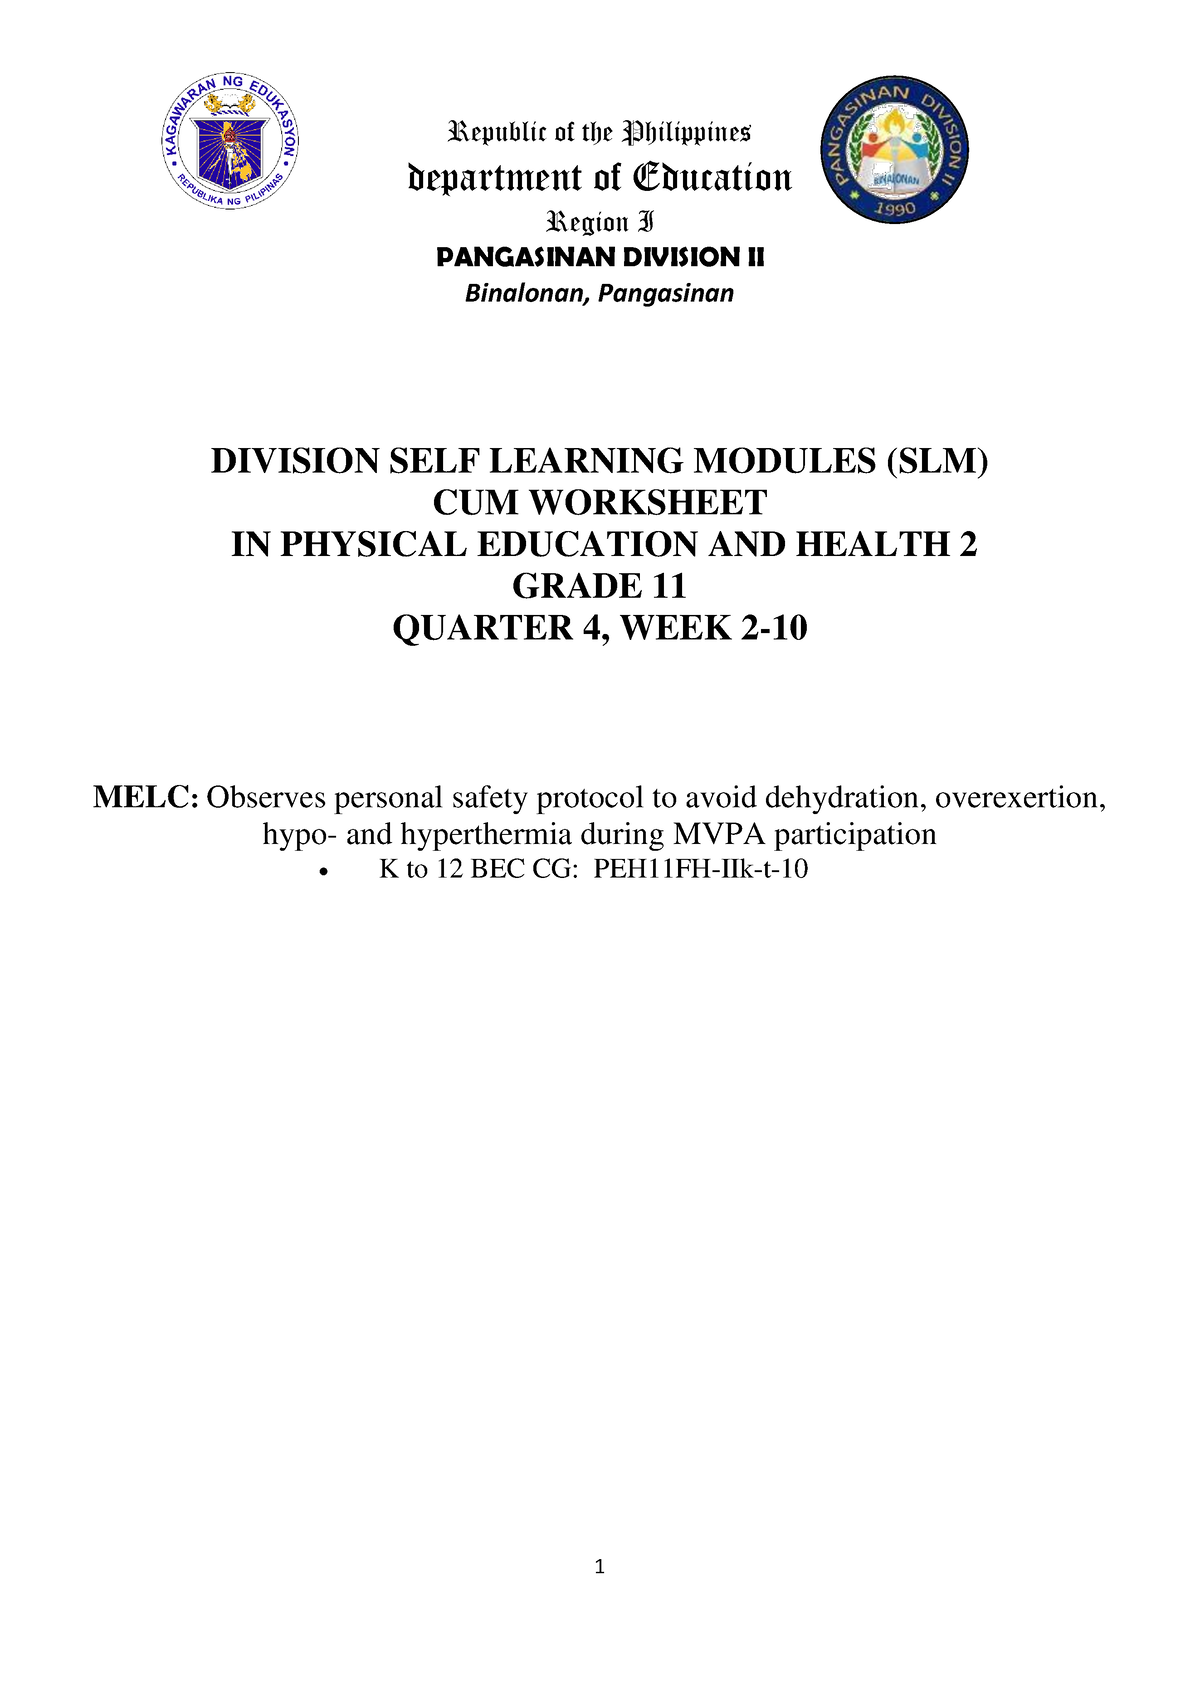 Division Self Learning Modules Peh 2 Melc 5 Division Self Learning Modules Slm Cum Worksheet 0107